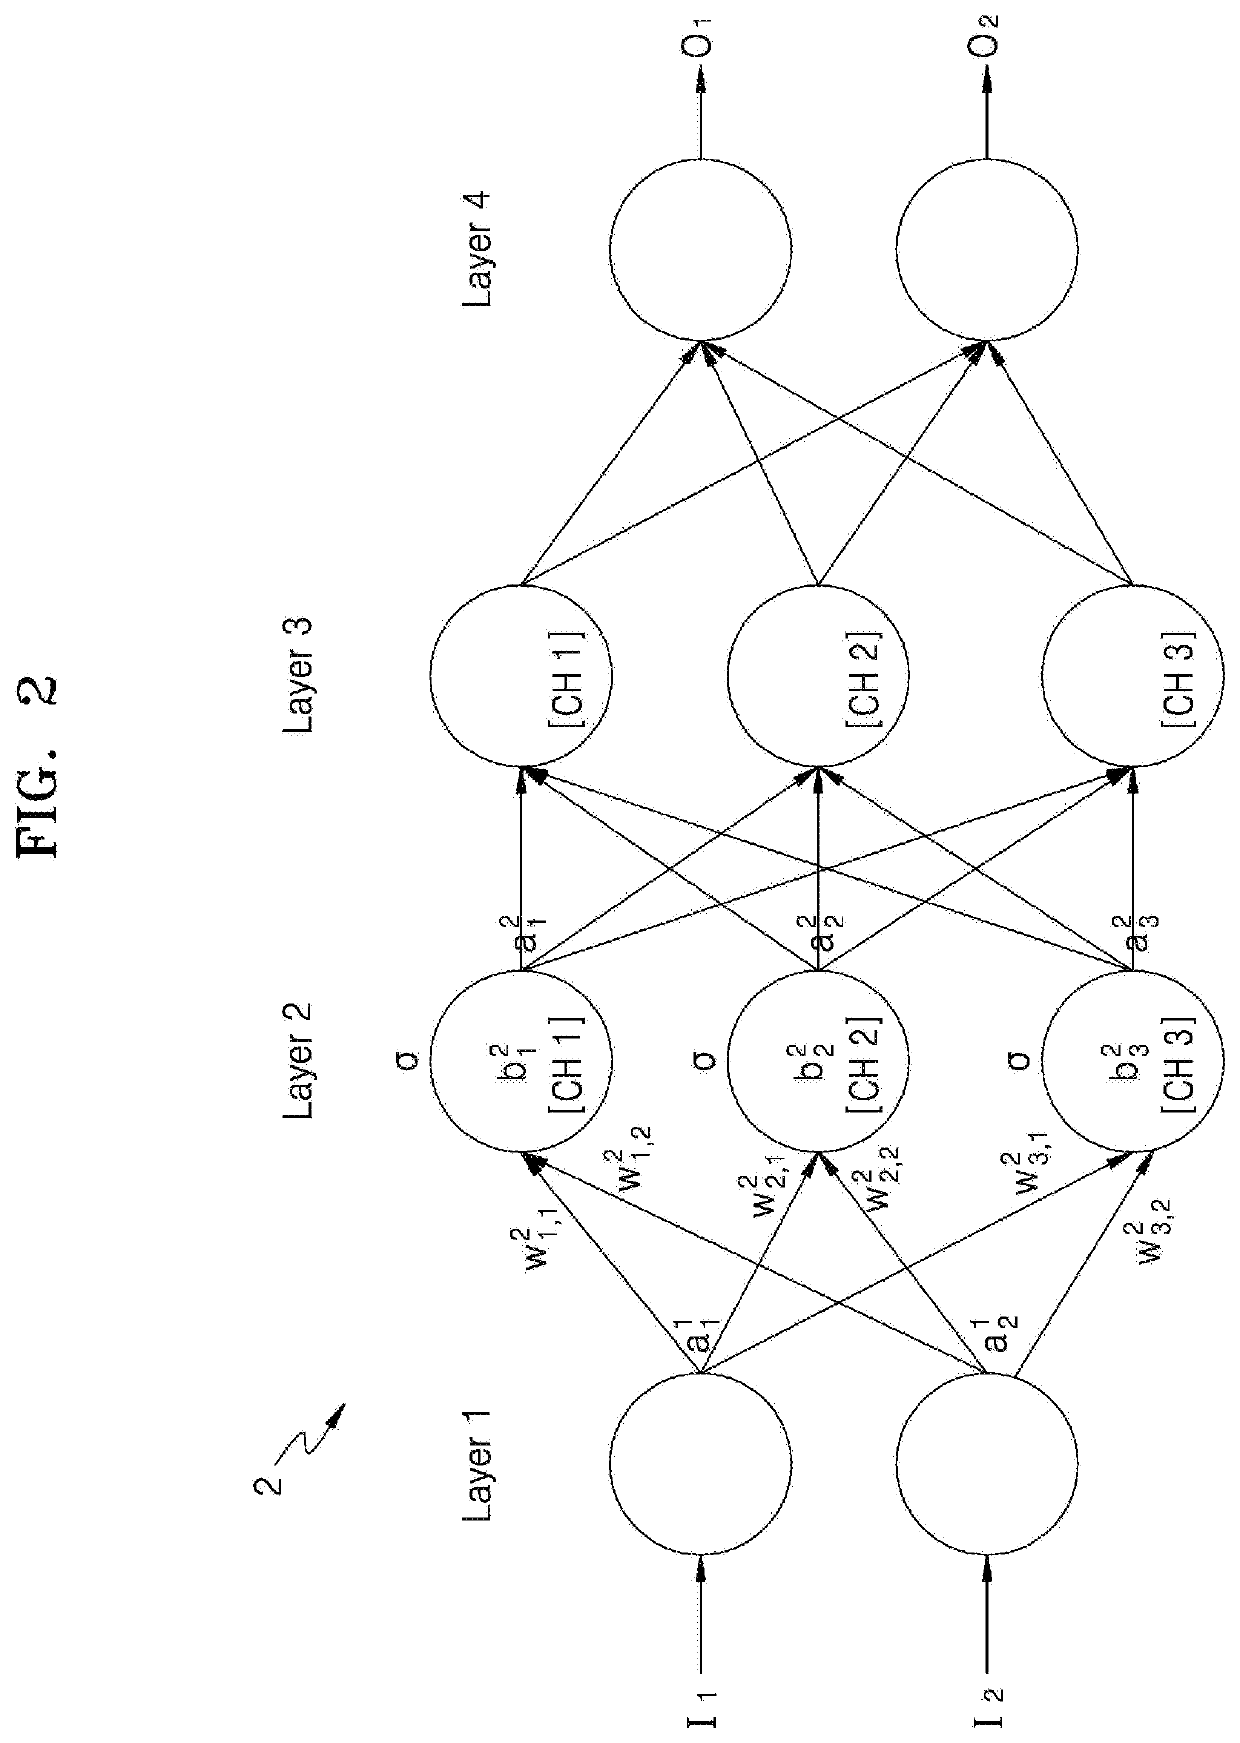 Method and apparatus for neural network quantization